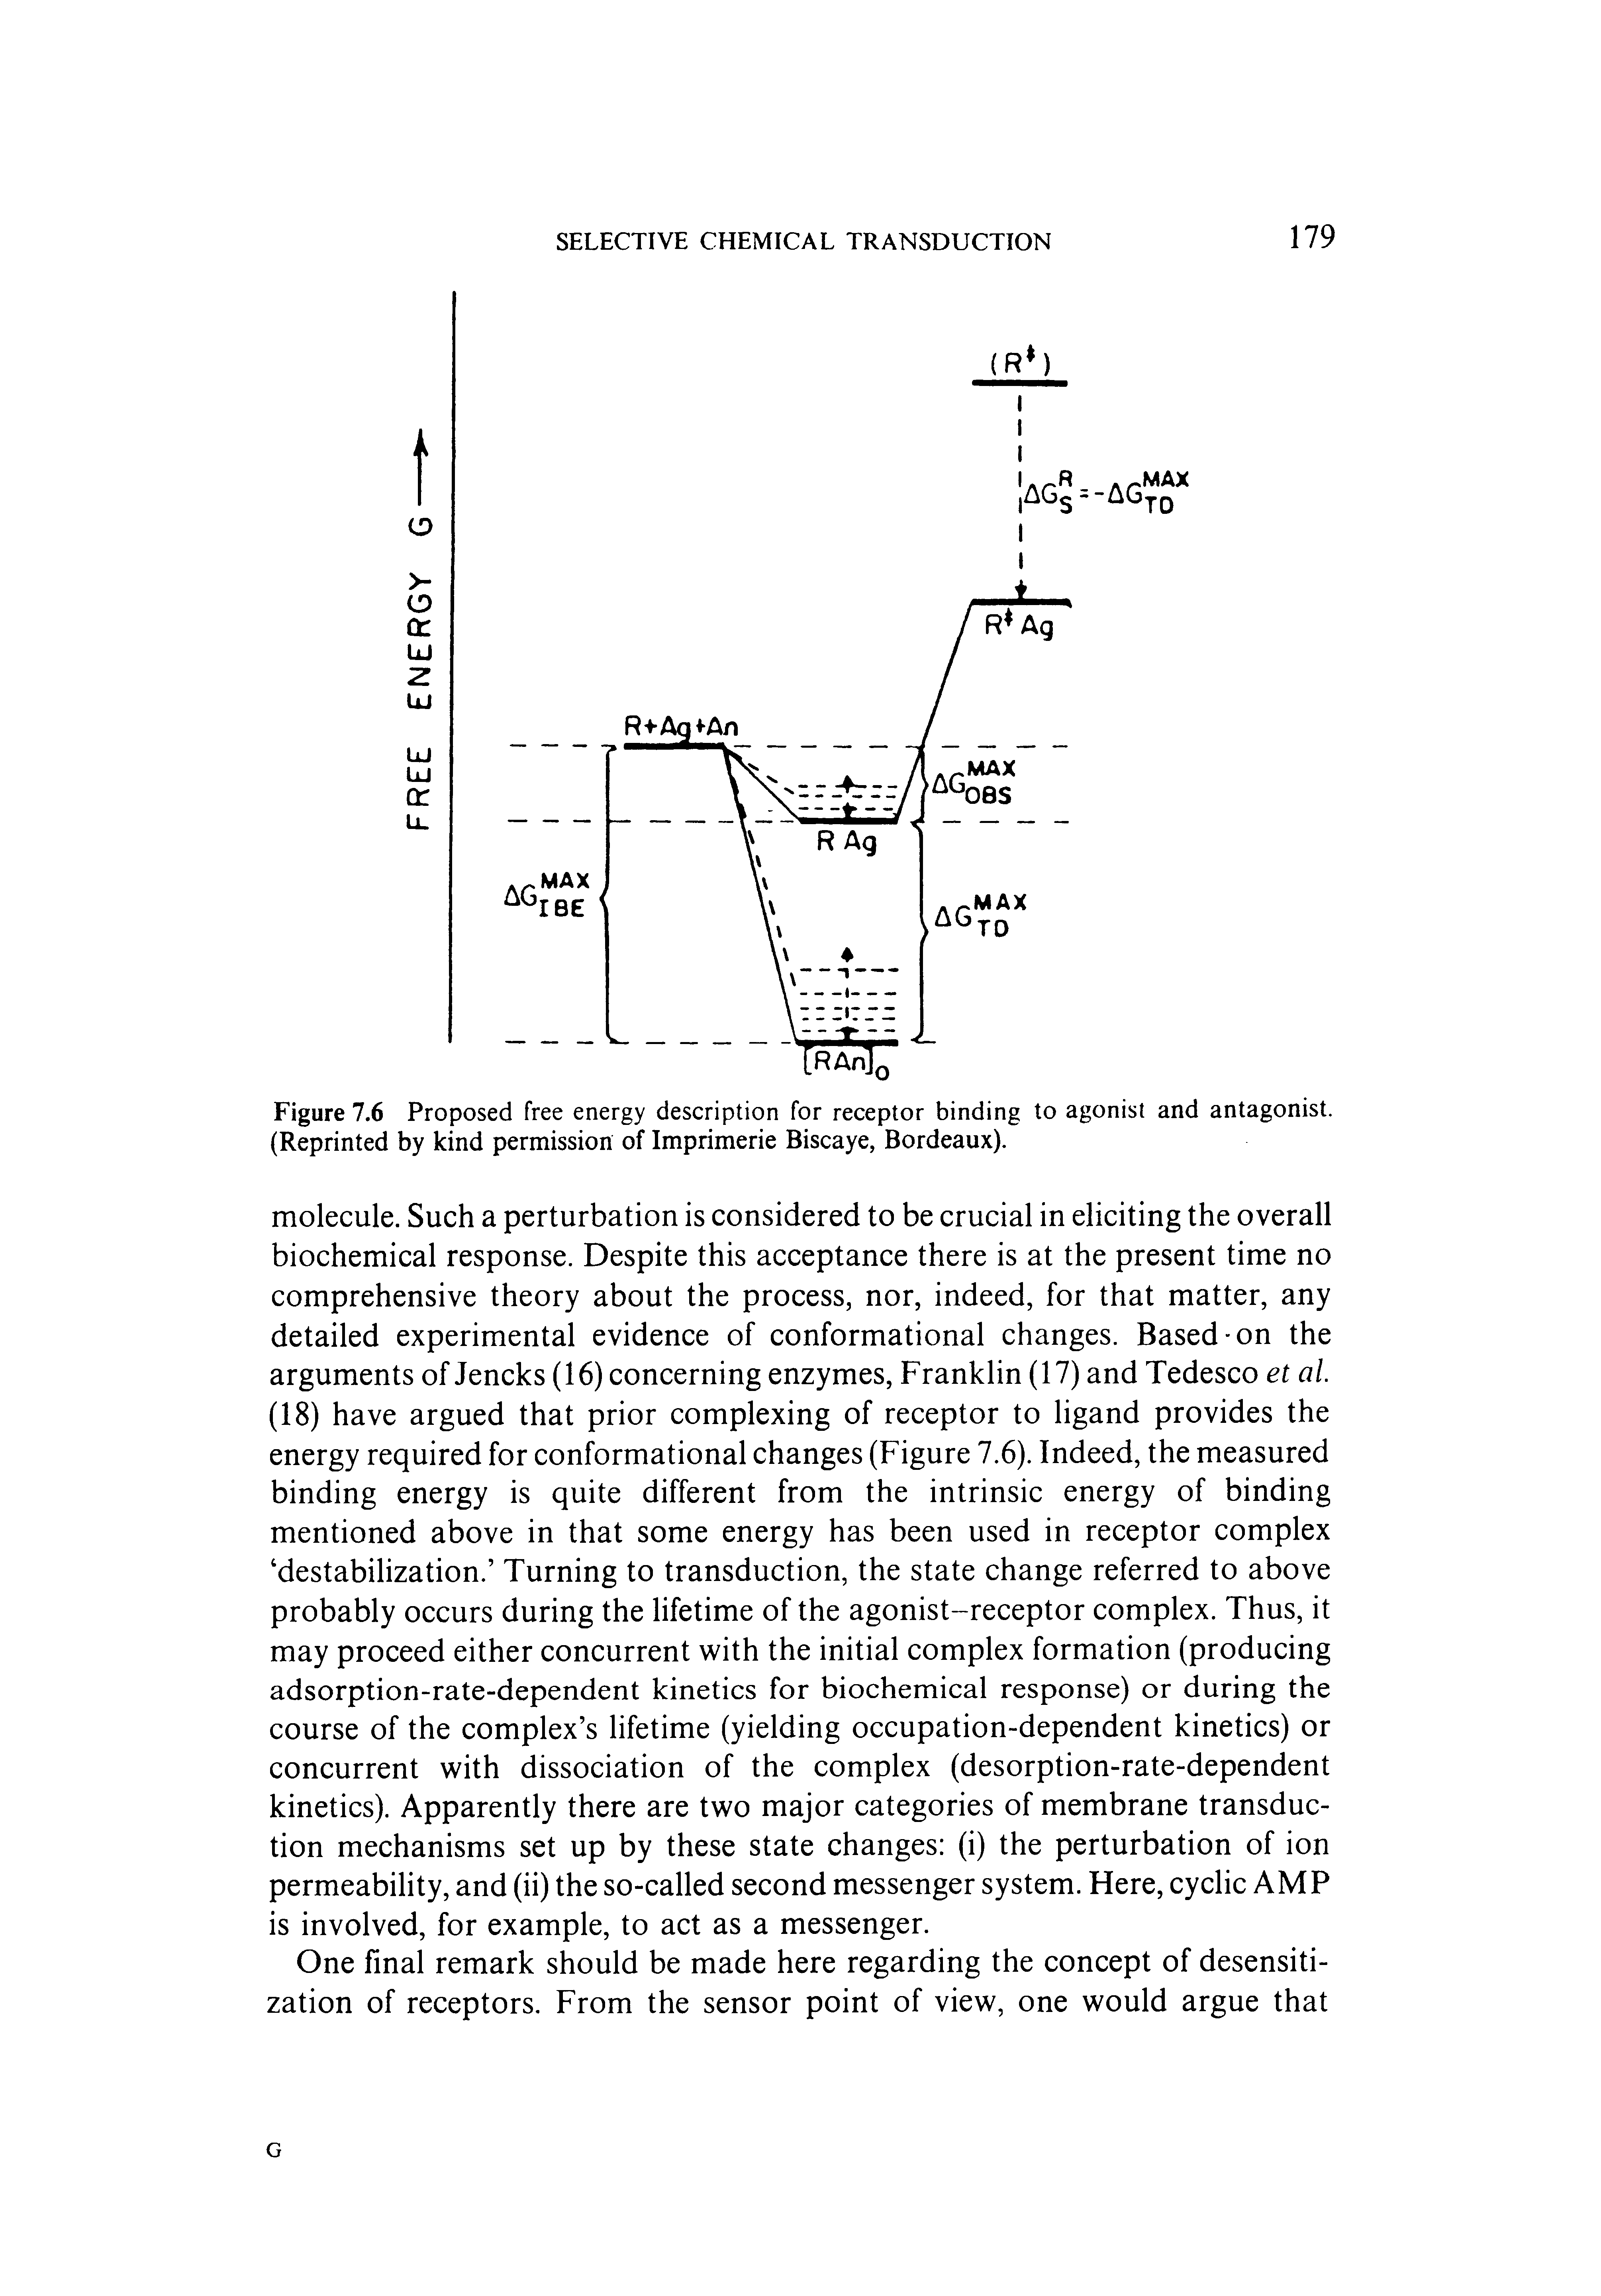 Figure 7.6 Proposed free energy description for receptor binding to agonist and antagonist. (Reprinted by kind permission of Imprimerie Biscaye, Bordeaux).